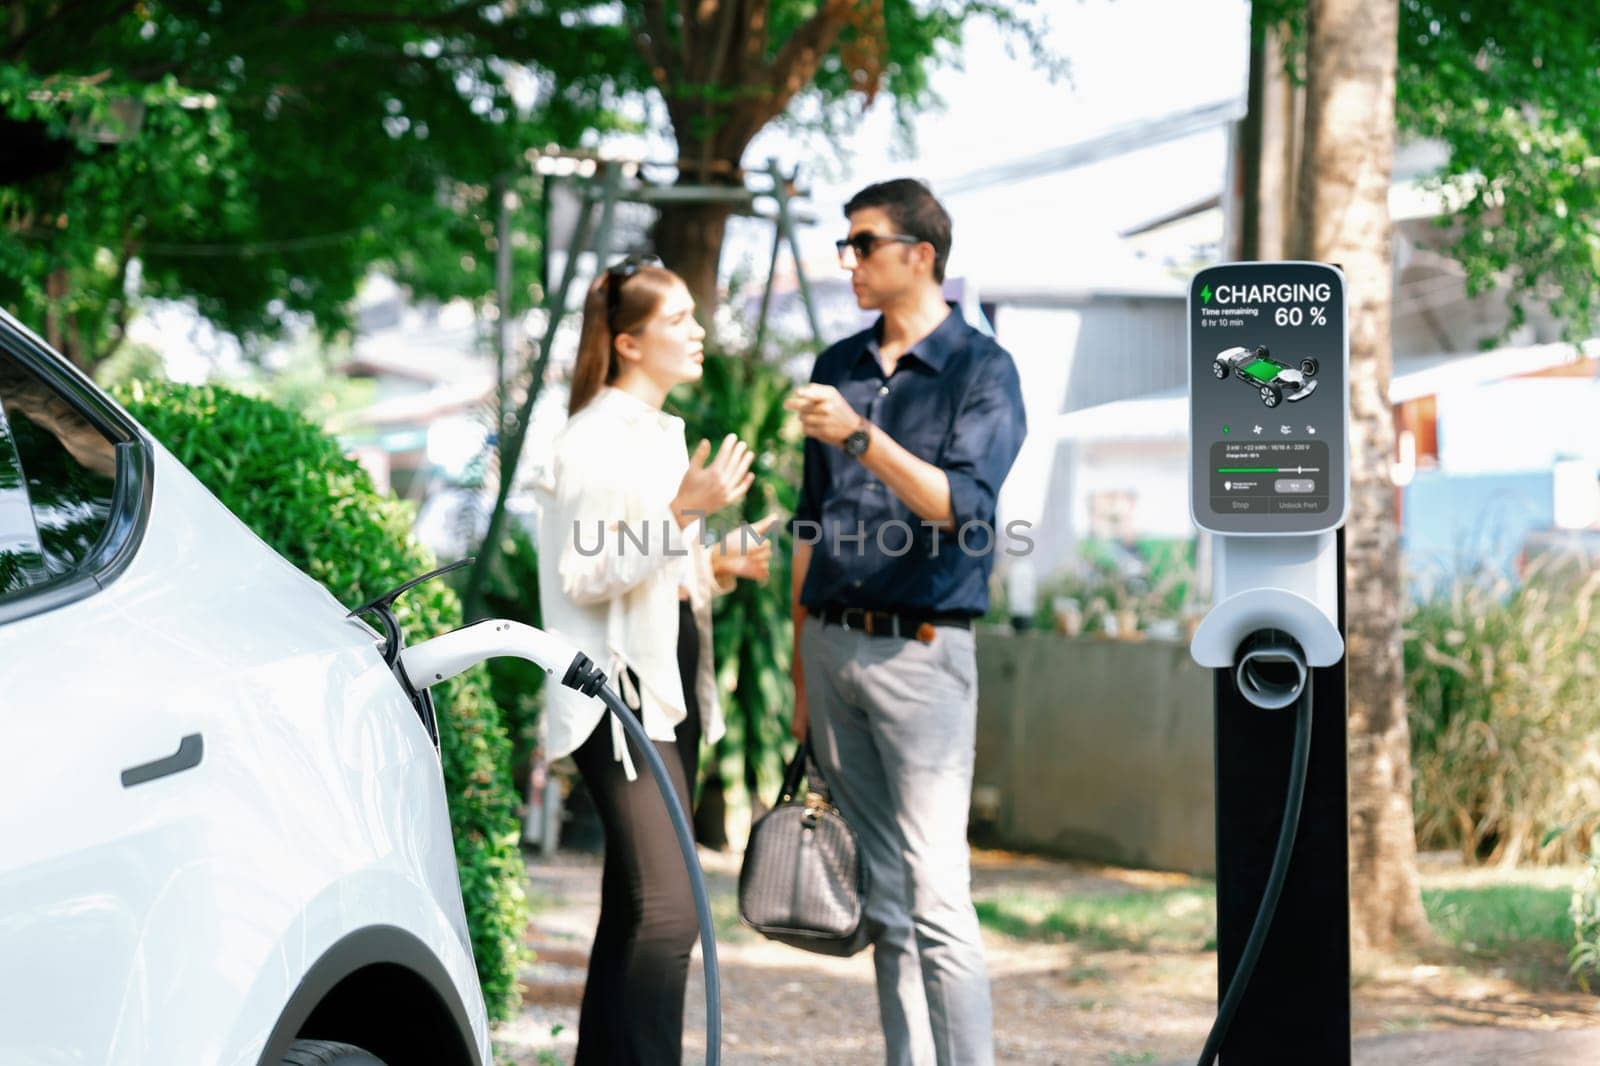 Young couple recharge electric car's battery from charging station in outdoor green city park in springtime. Rechargeable EV car for sustainable environmental friendly urban travel lifestyle.Expedient